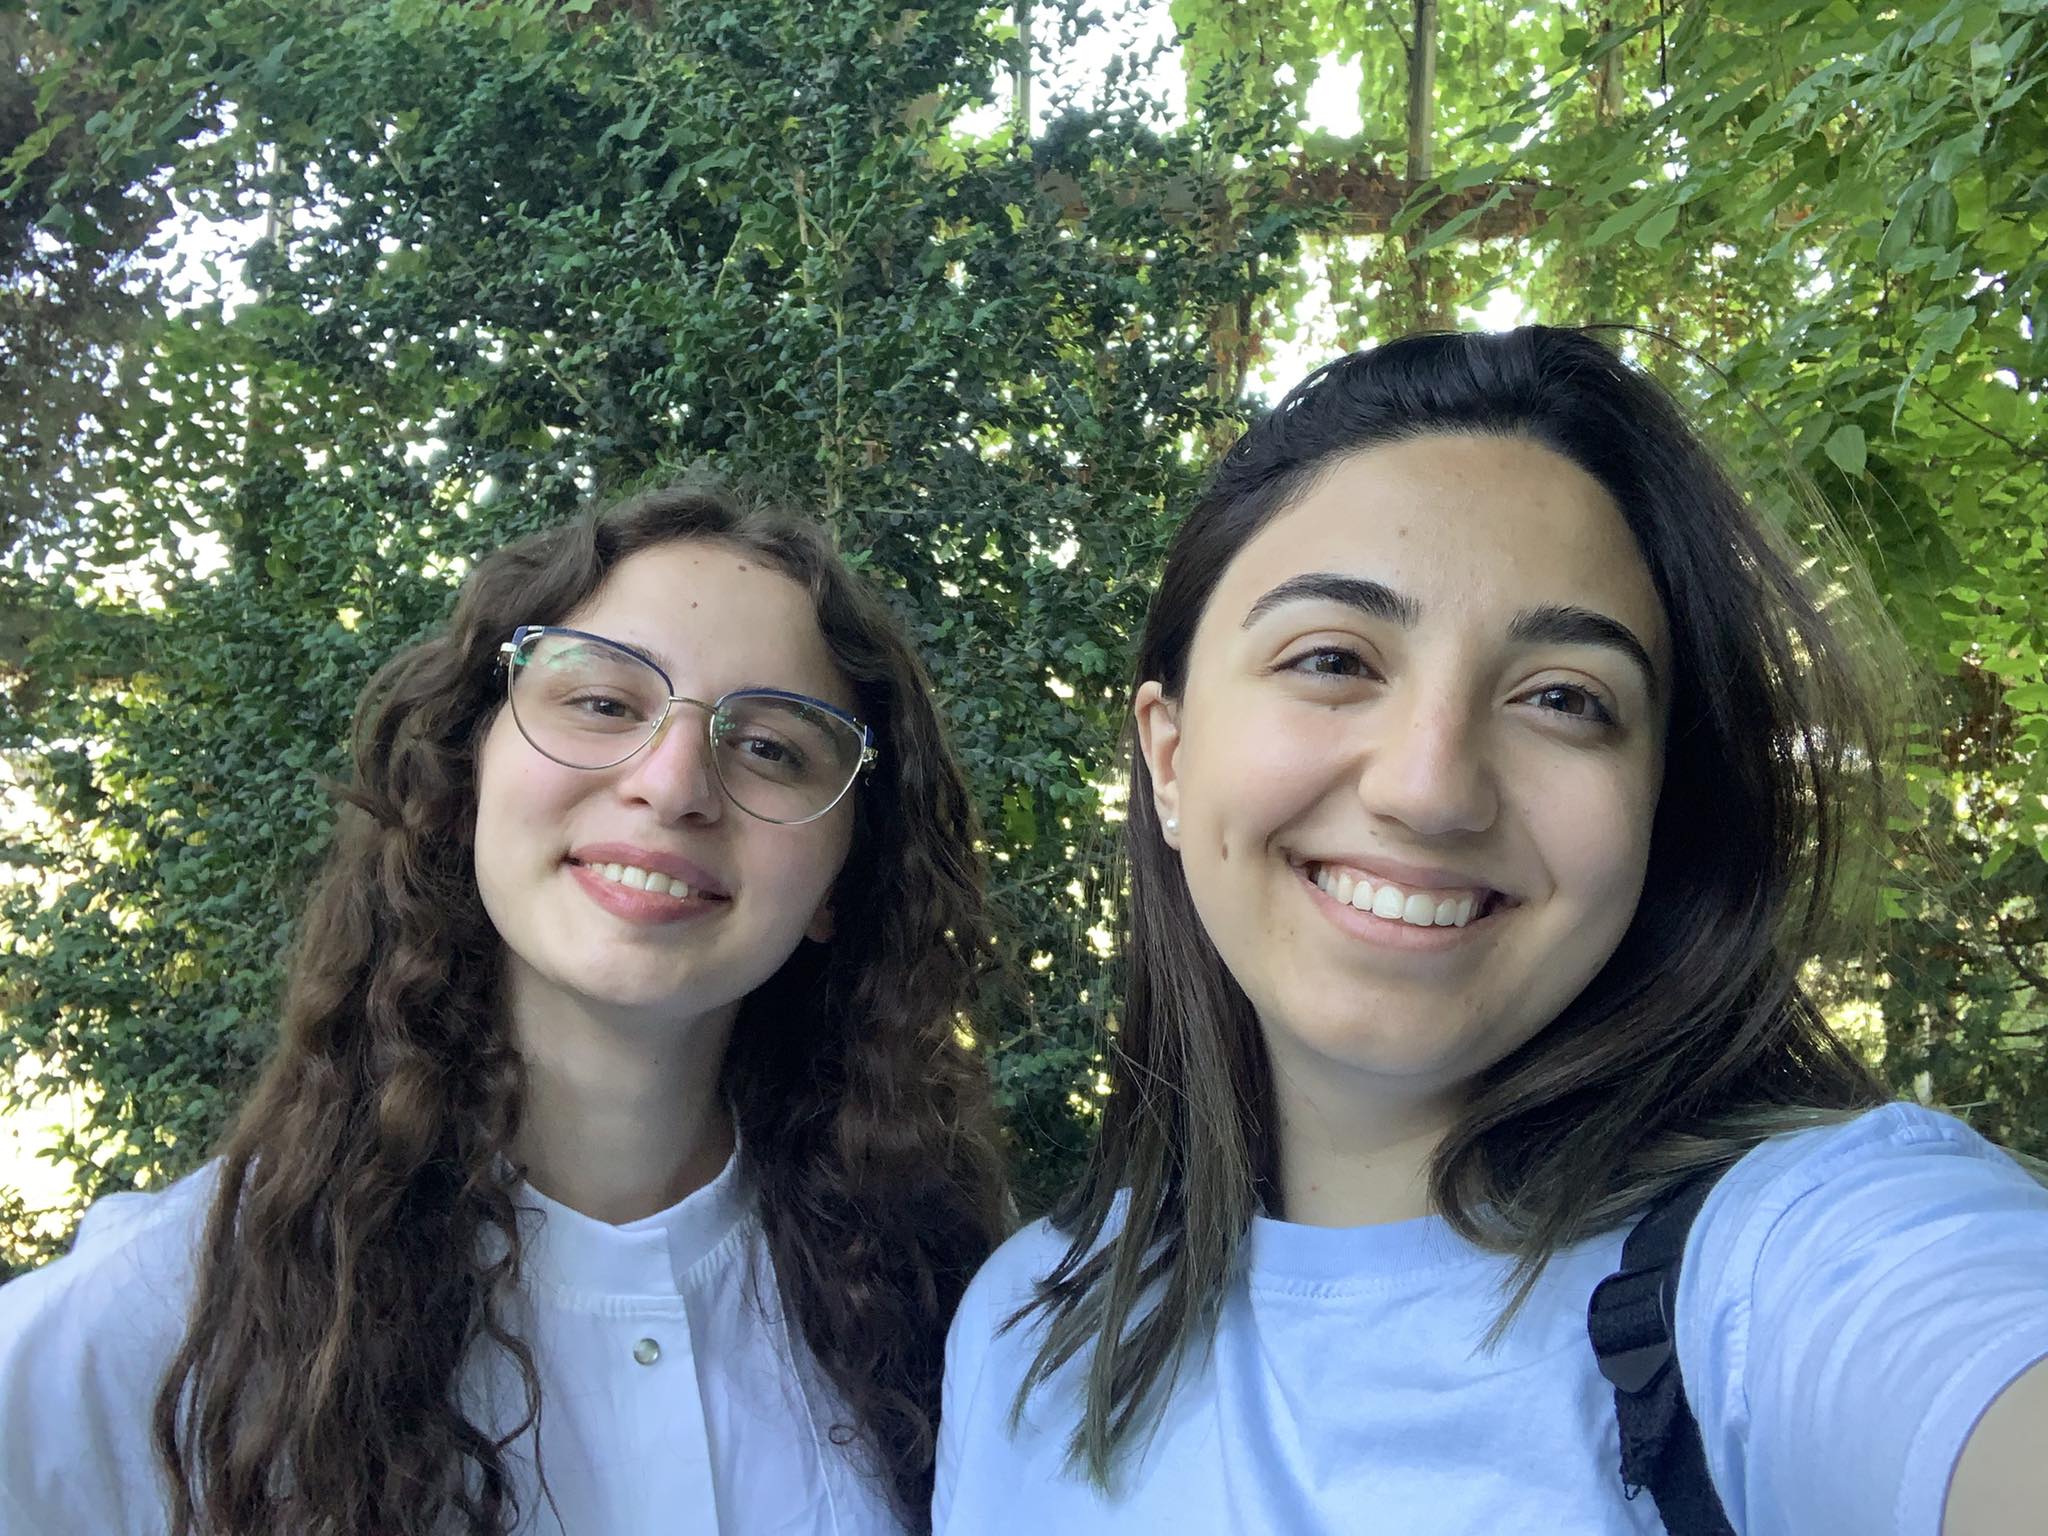 Lusine and Lia’s Journey to Inspire Environmental Change in Armenia